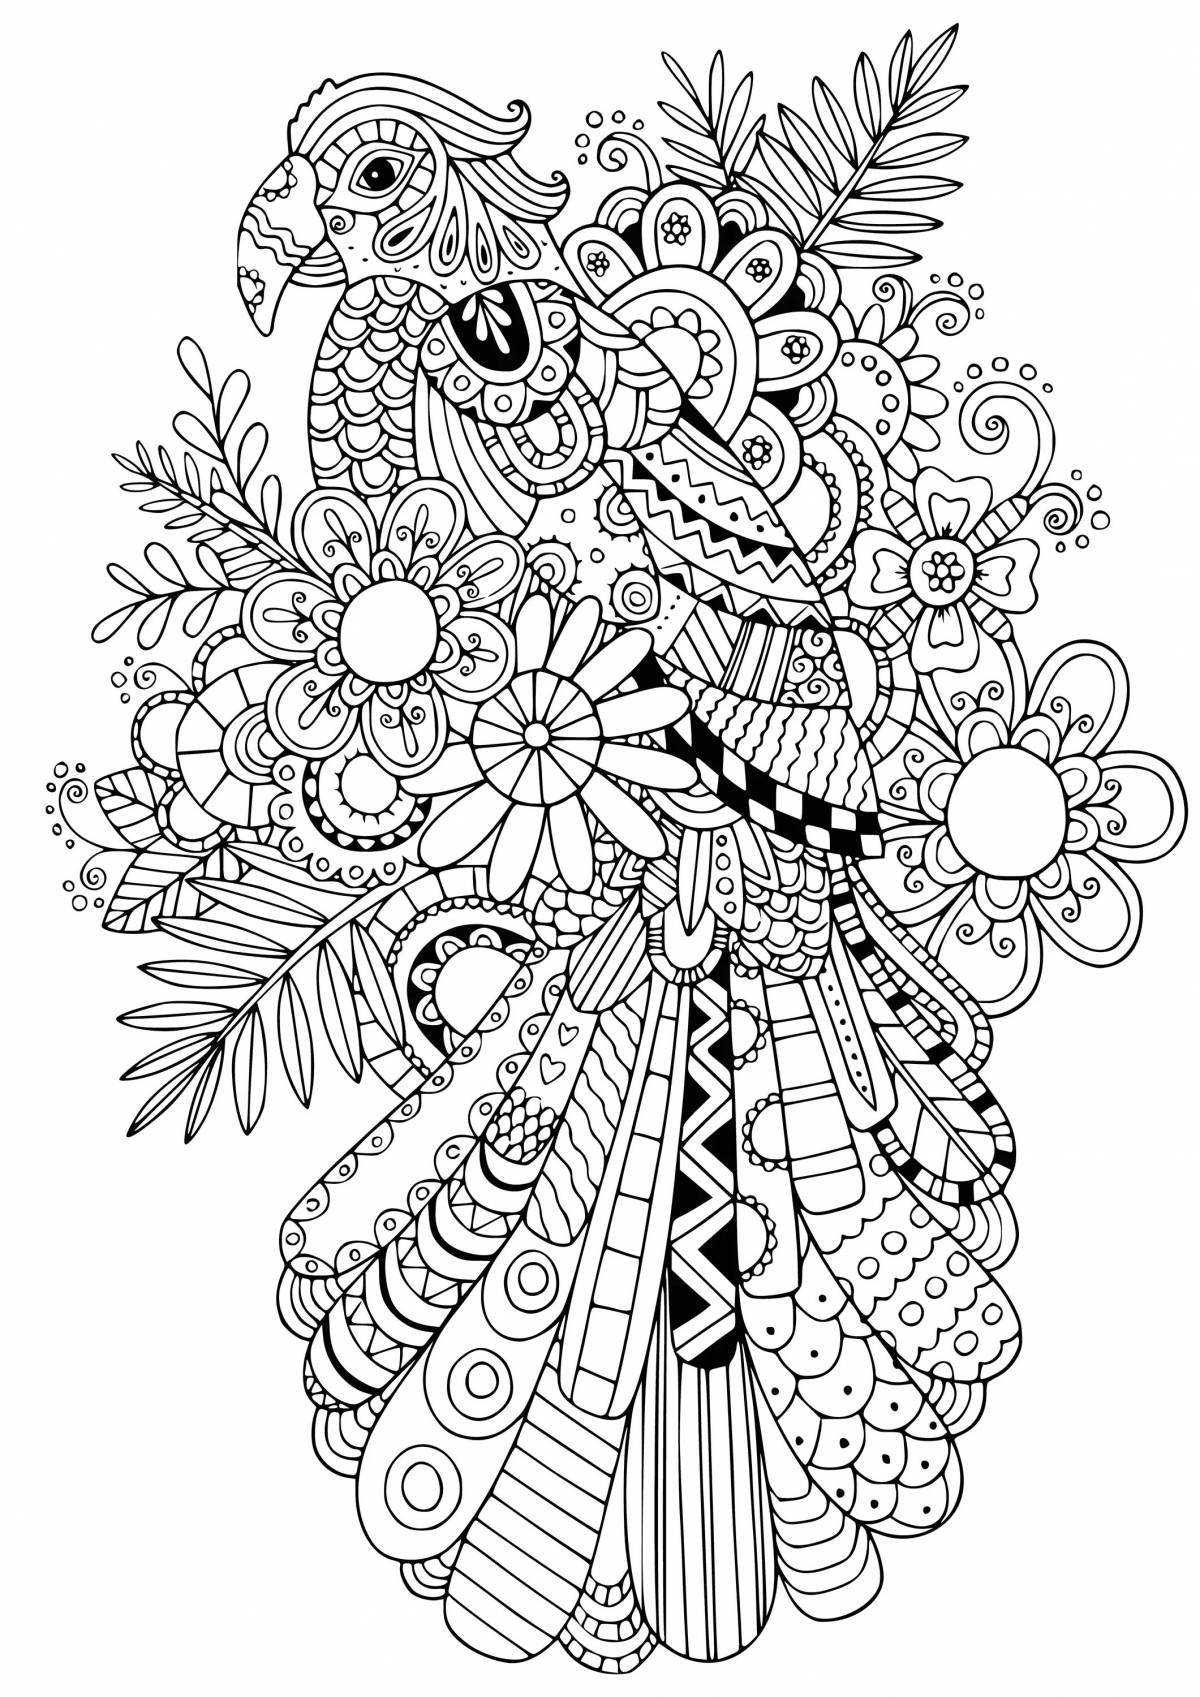 Refreshing art therapy adult coloring book